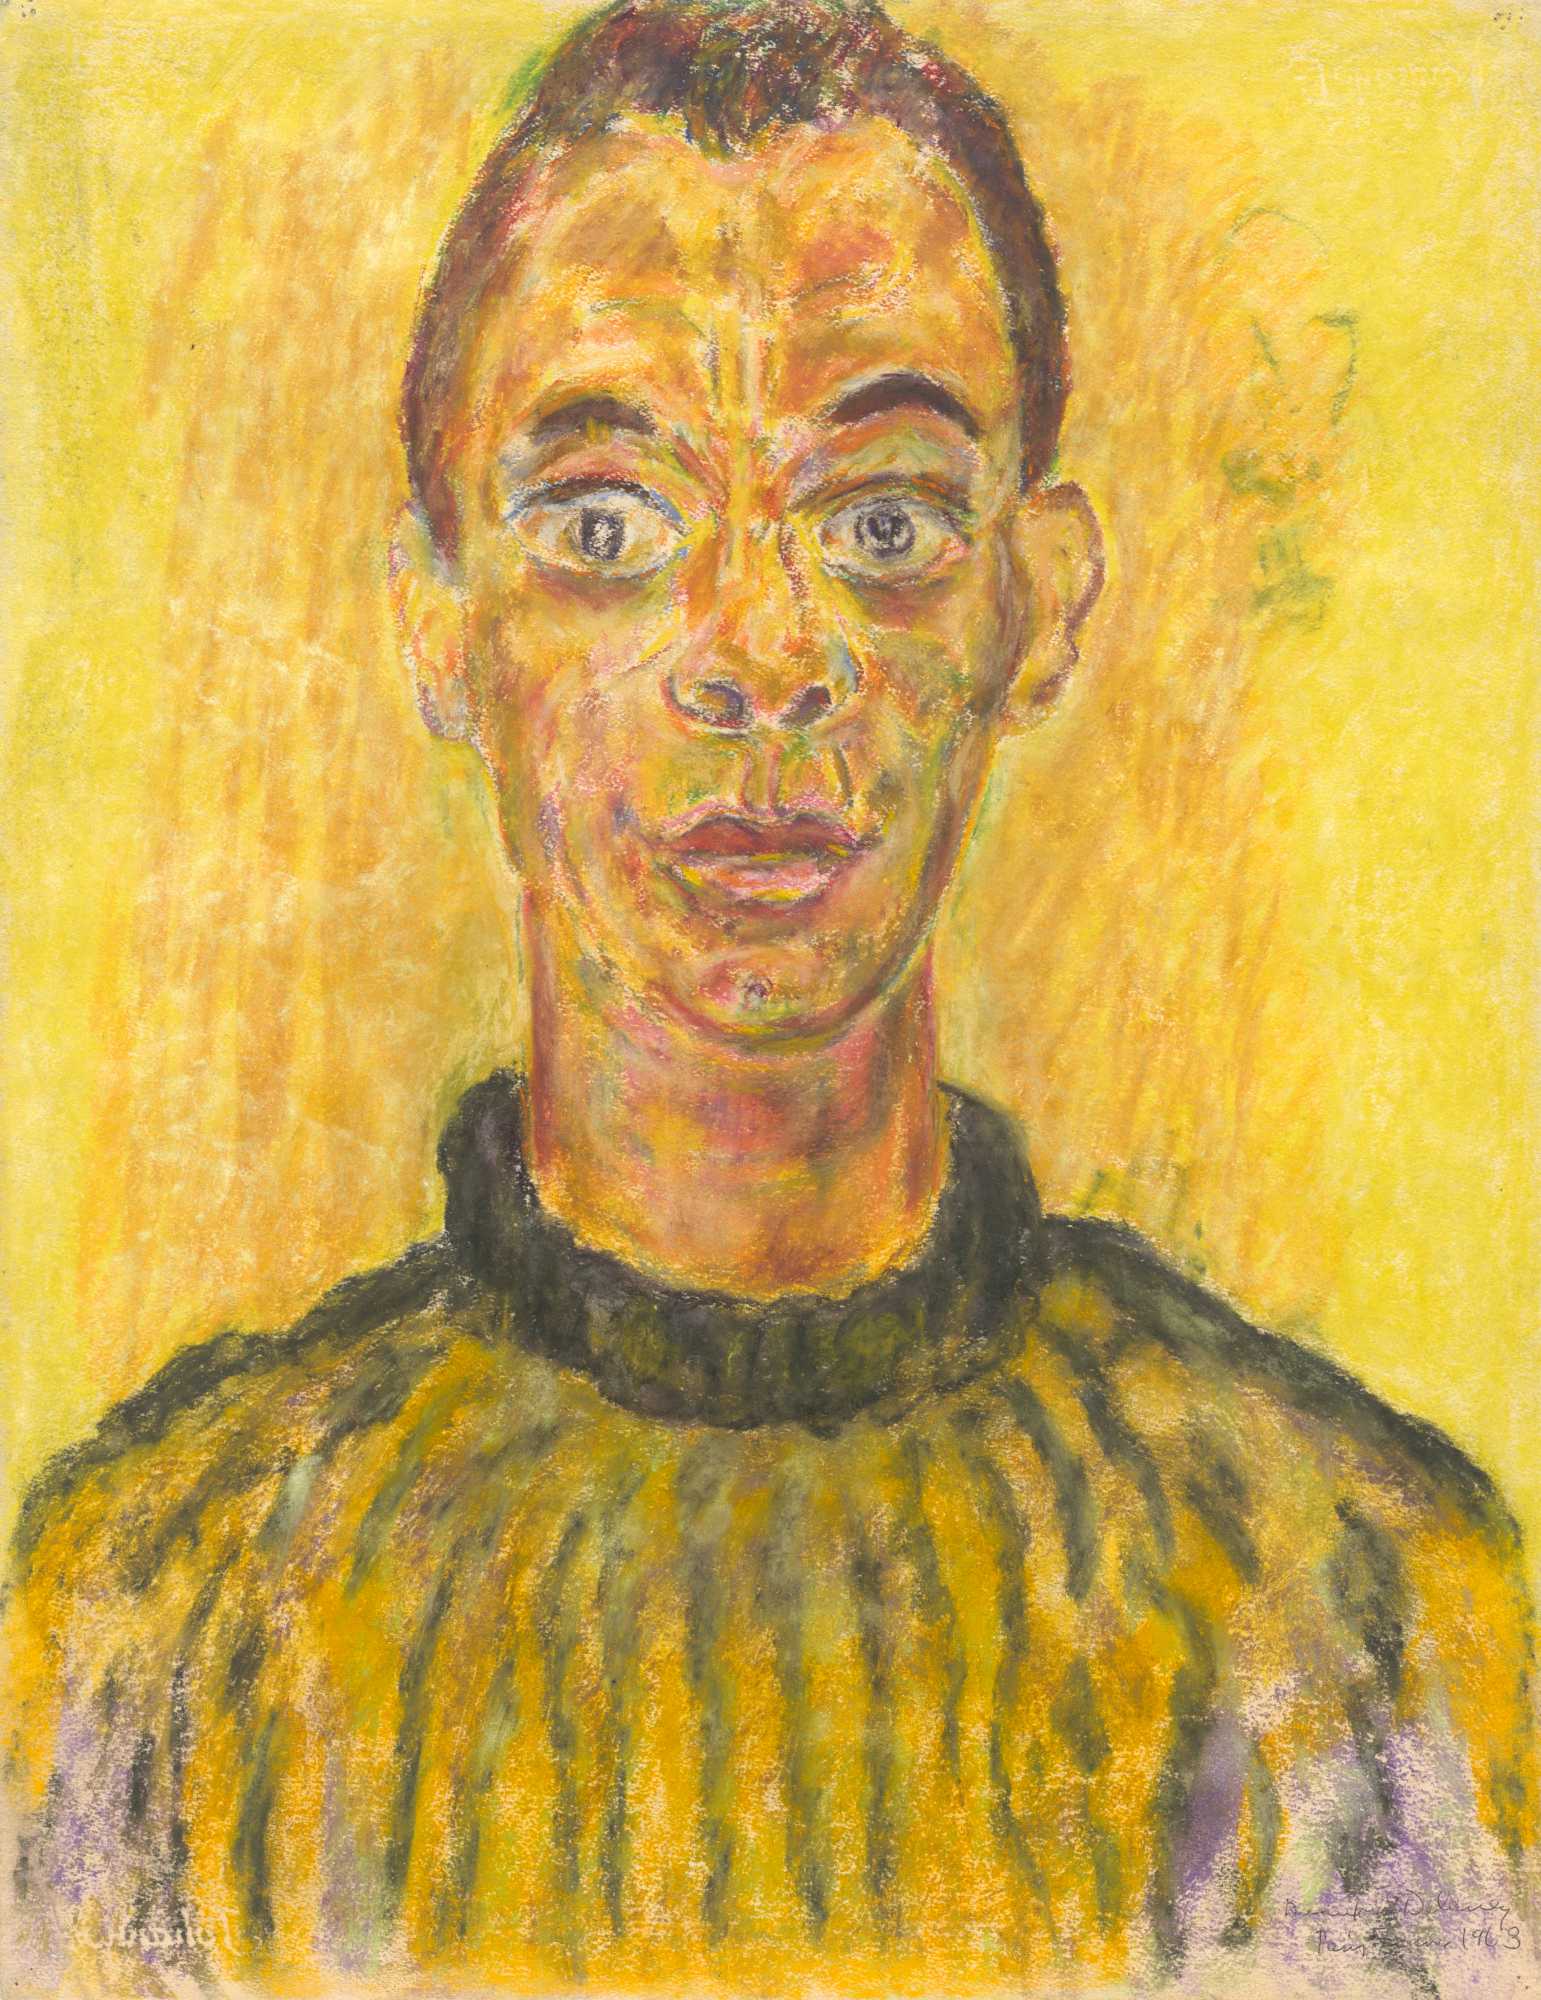 Modernist painting of James Baldwin by Beauford Delaney